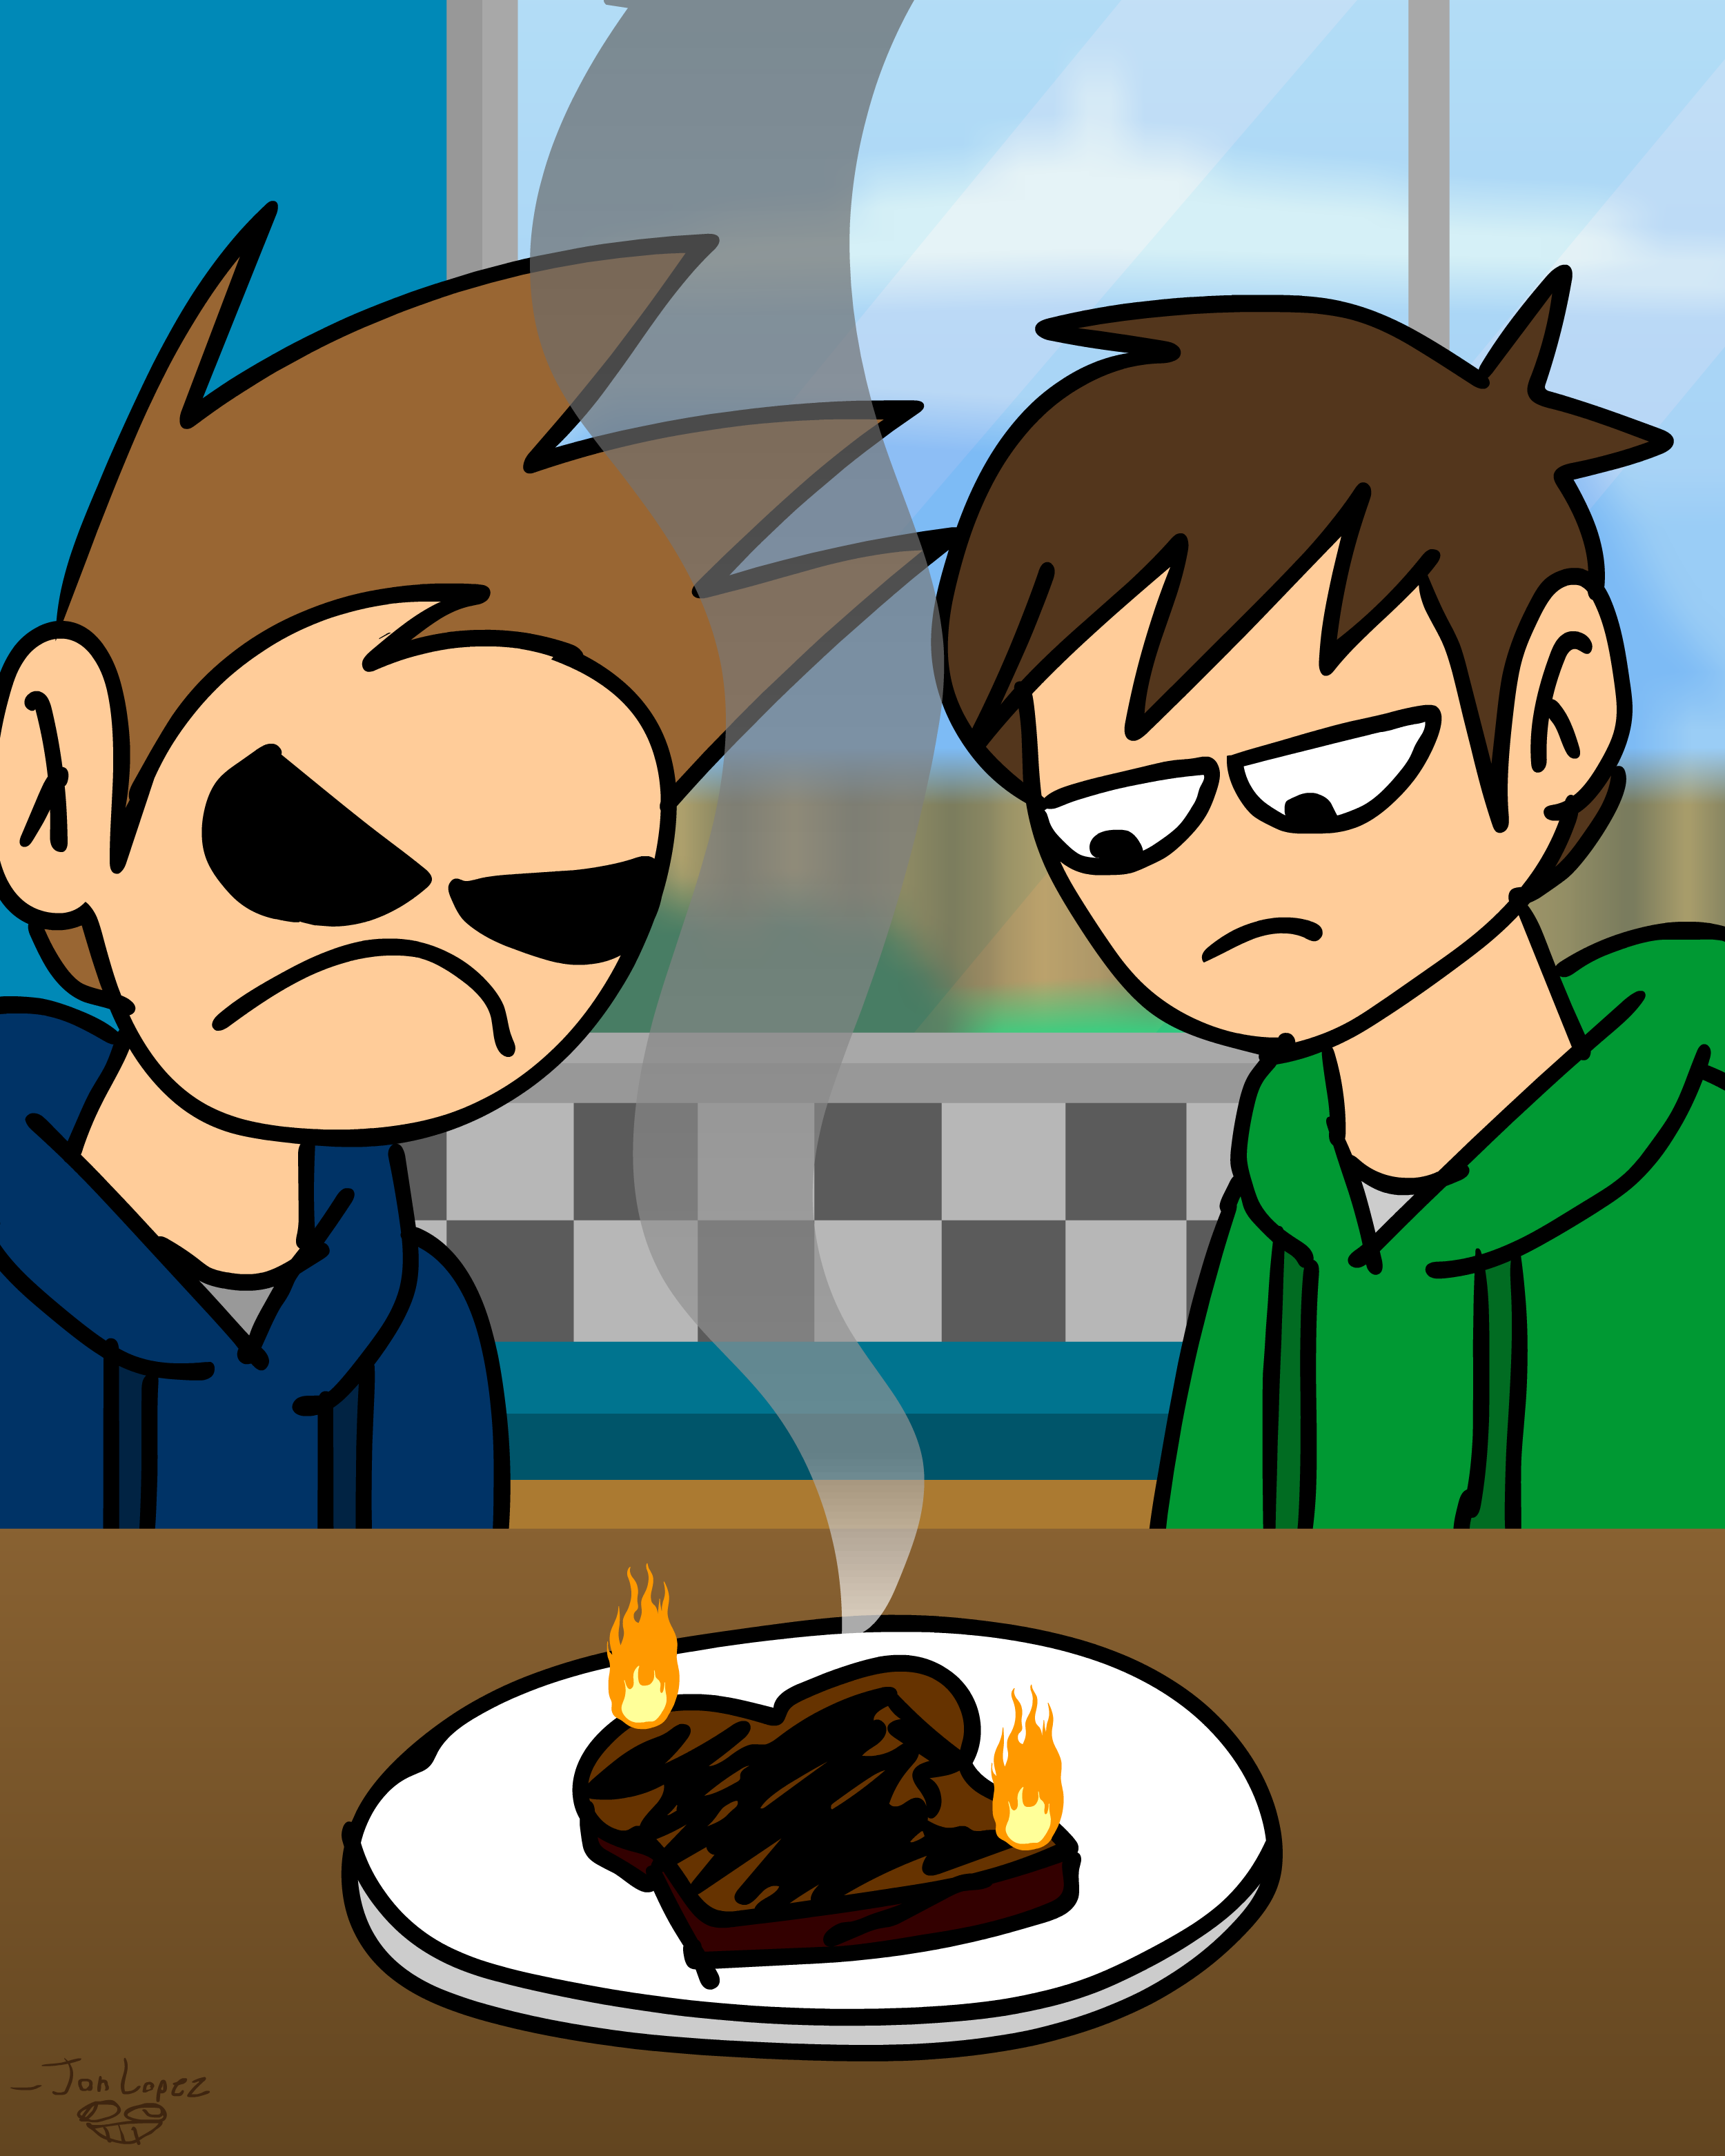 Eddsworld on X: PUDS! Matt found out that today is